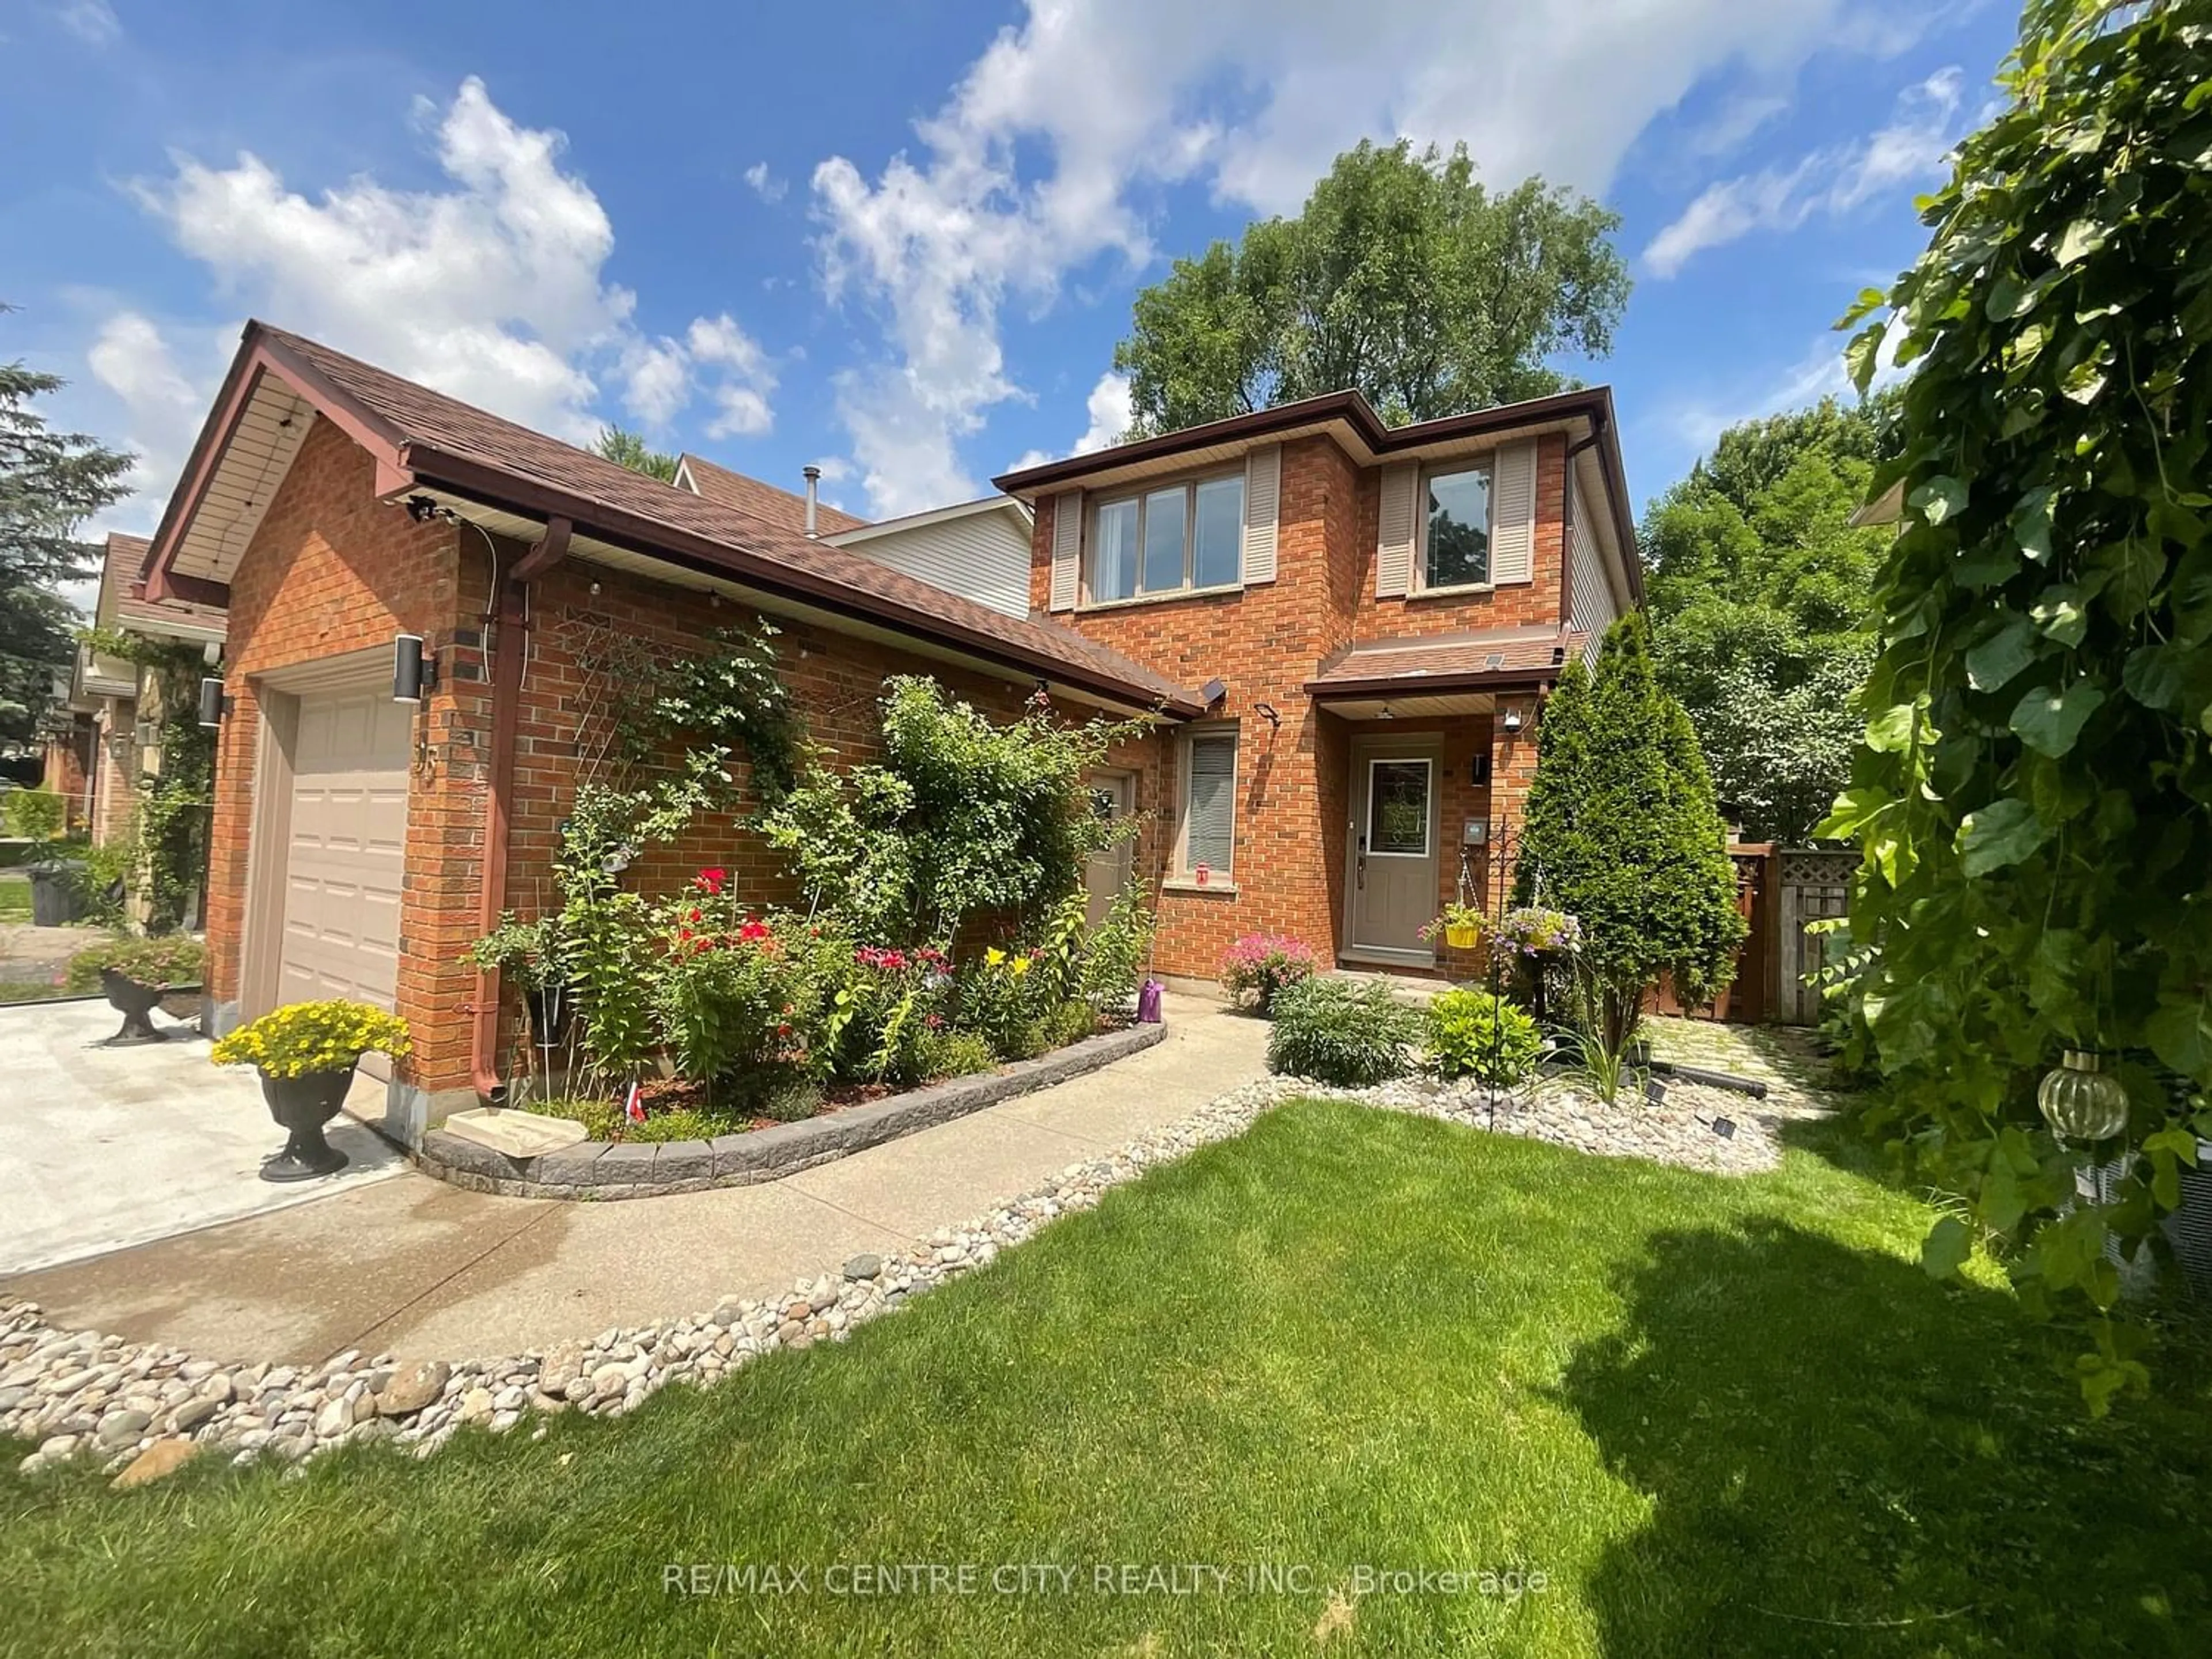 Home with brick exterior material for 95 Walmer Gdns, London Ontario N6G 4H1